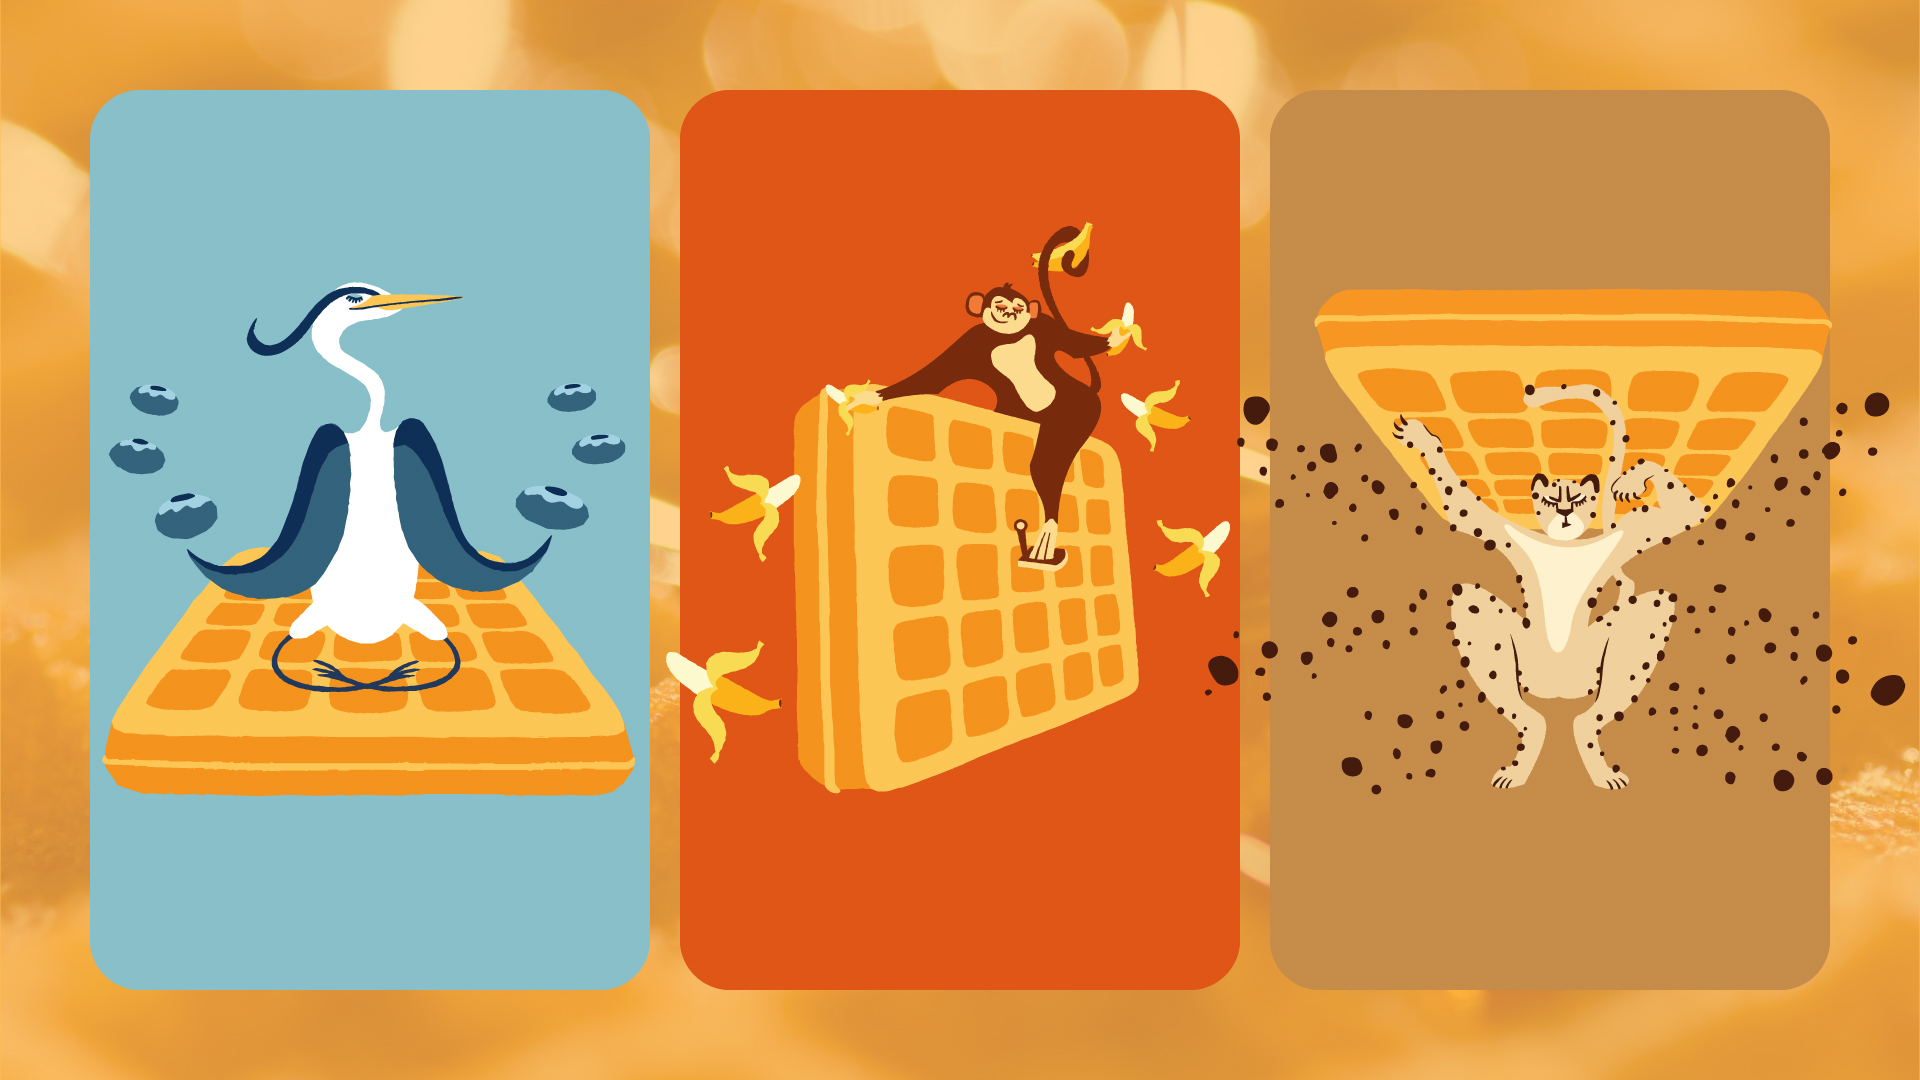 Three character illustrations representing each of Norma’s waffle mix flavors: a heron, accompanied by some blueberries, sits on top of a waffle; a monkey, accompanied by some bananas, pedals on top of a waffle; and a leopard, accompanied by some chocolate chips, squats and holds a waffle overhead.